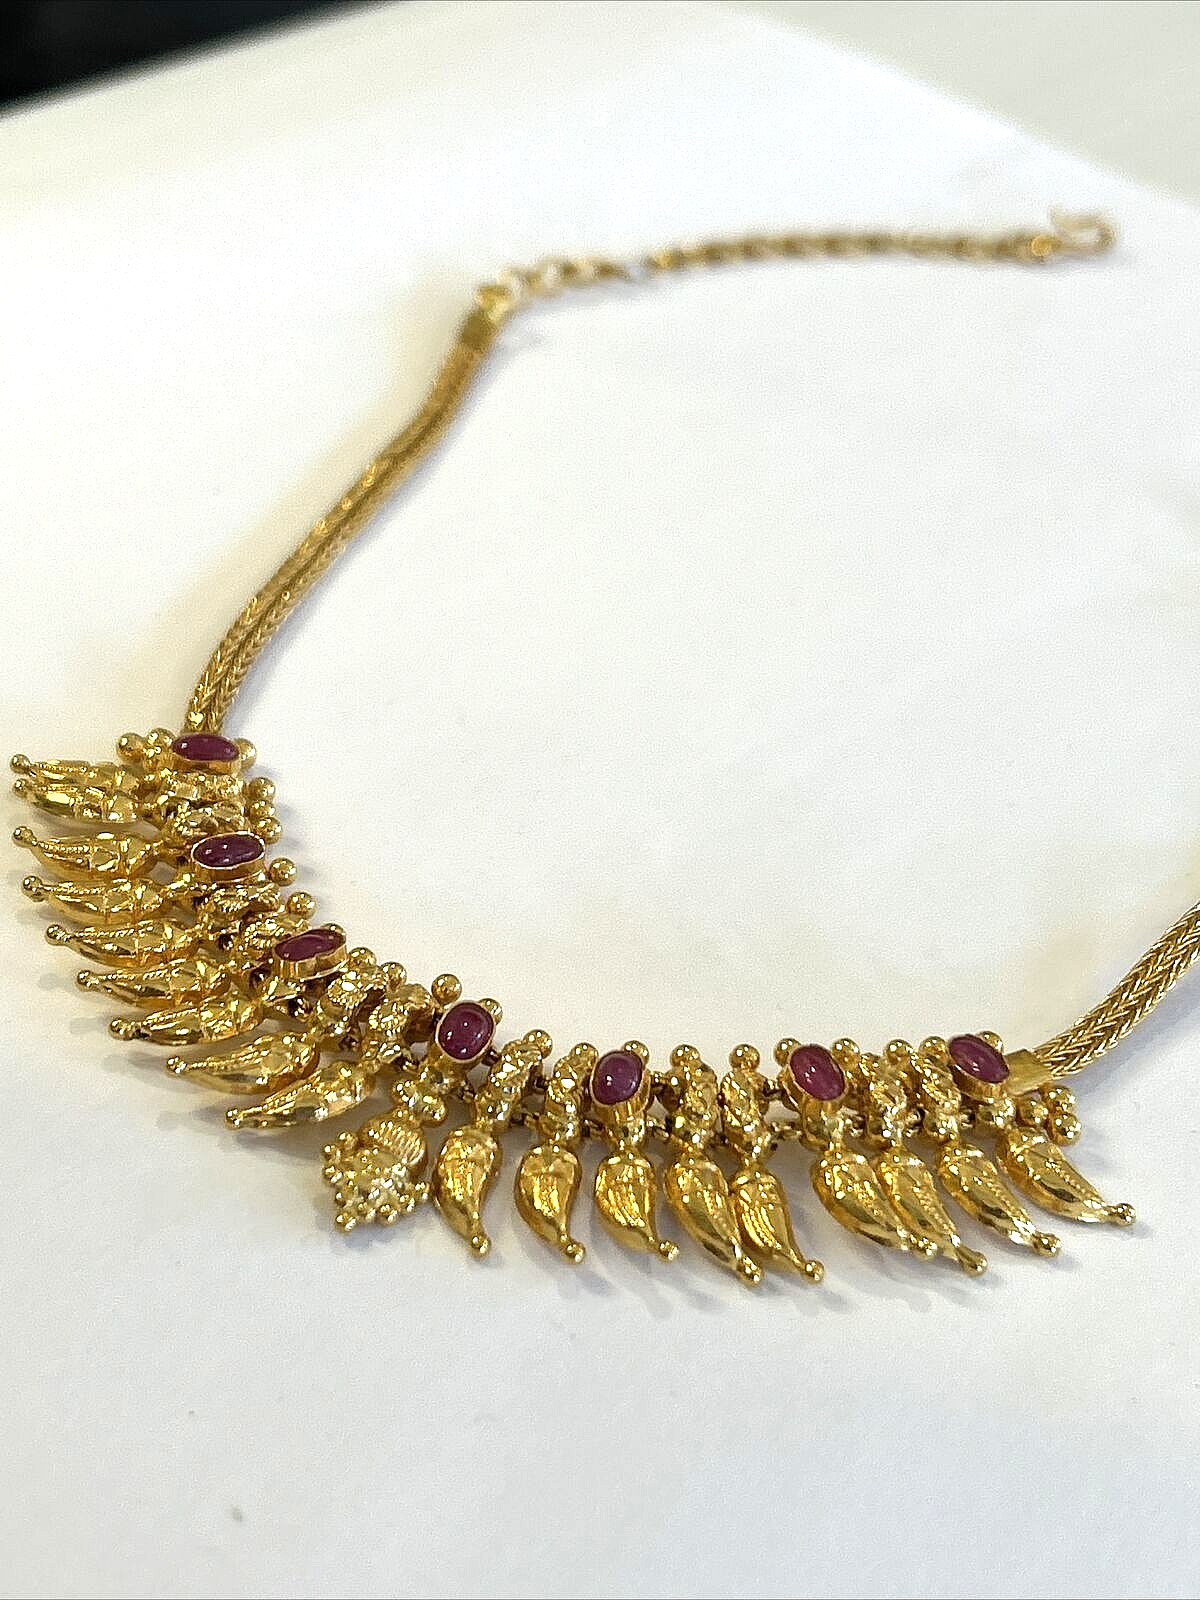 22k Gold Necklace w/ Cabochon Rubies - 16" - 20.7 Grams